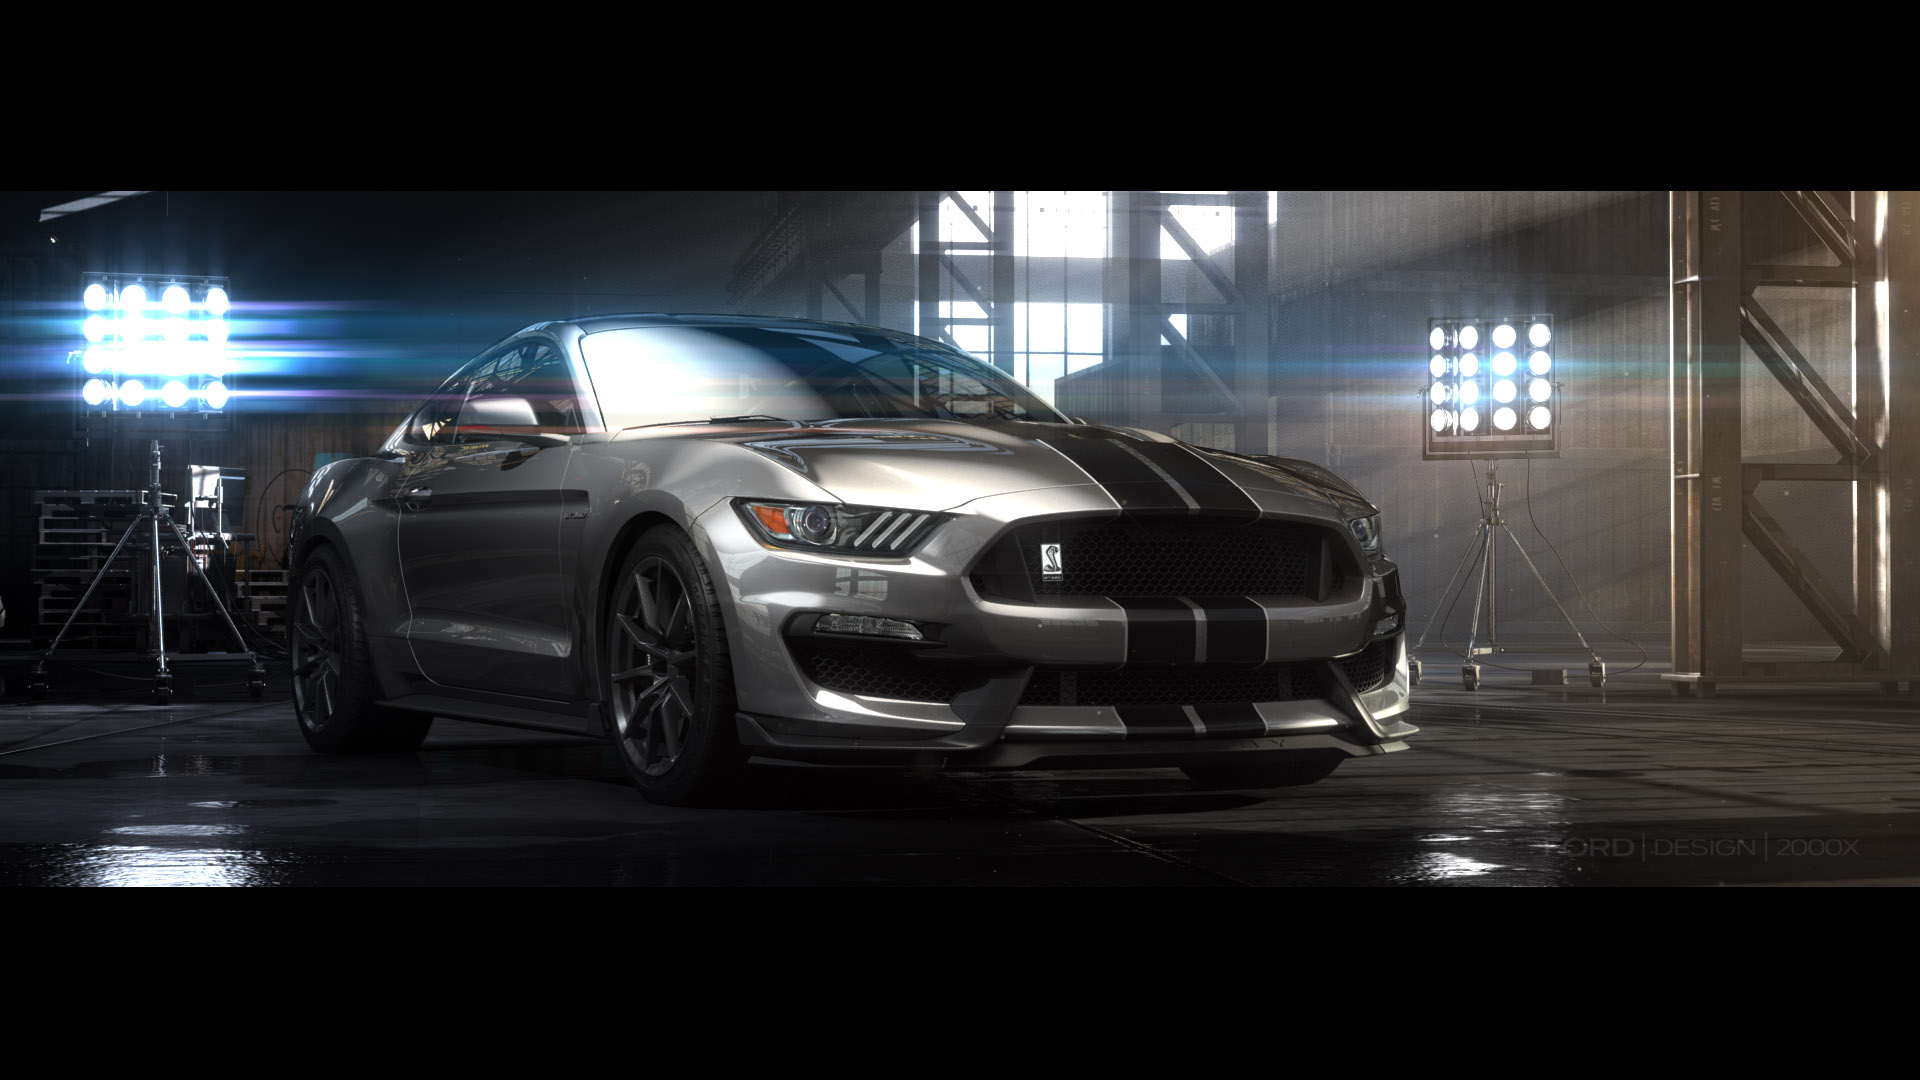 29 Ford Mustang Shelby Gt350 Wallpapers On Wallpapersafari Images, Photos, Reviews